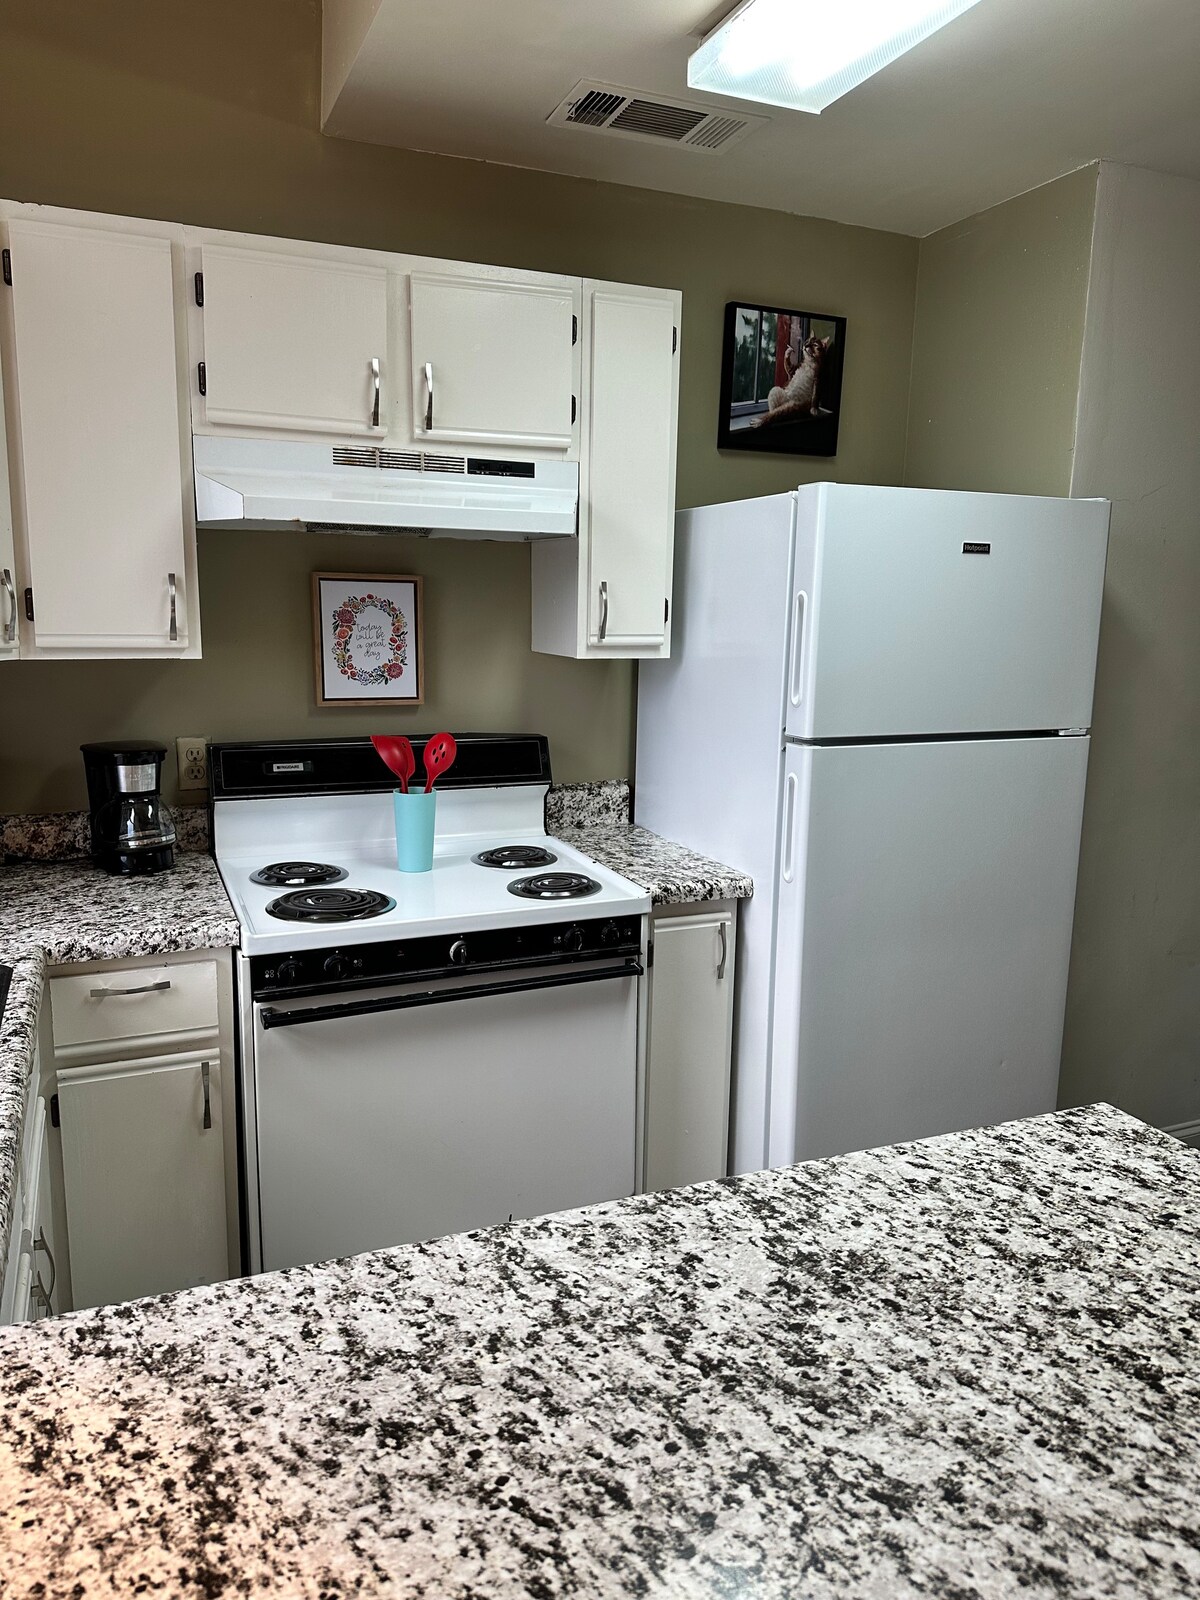 Downtown Living Beale - 1BR Apt w/Flexible Rates